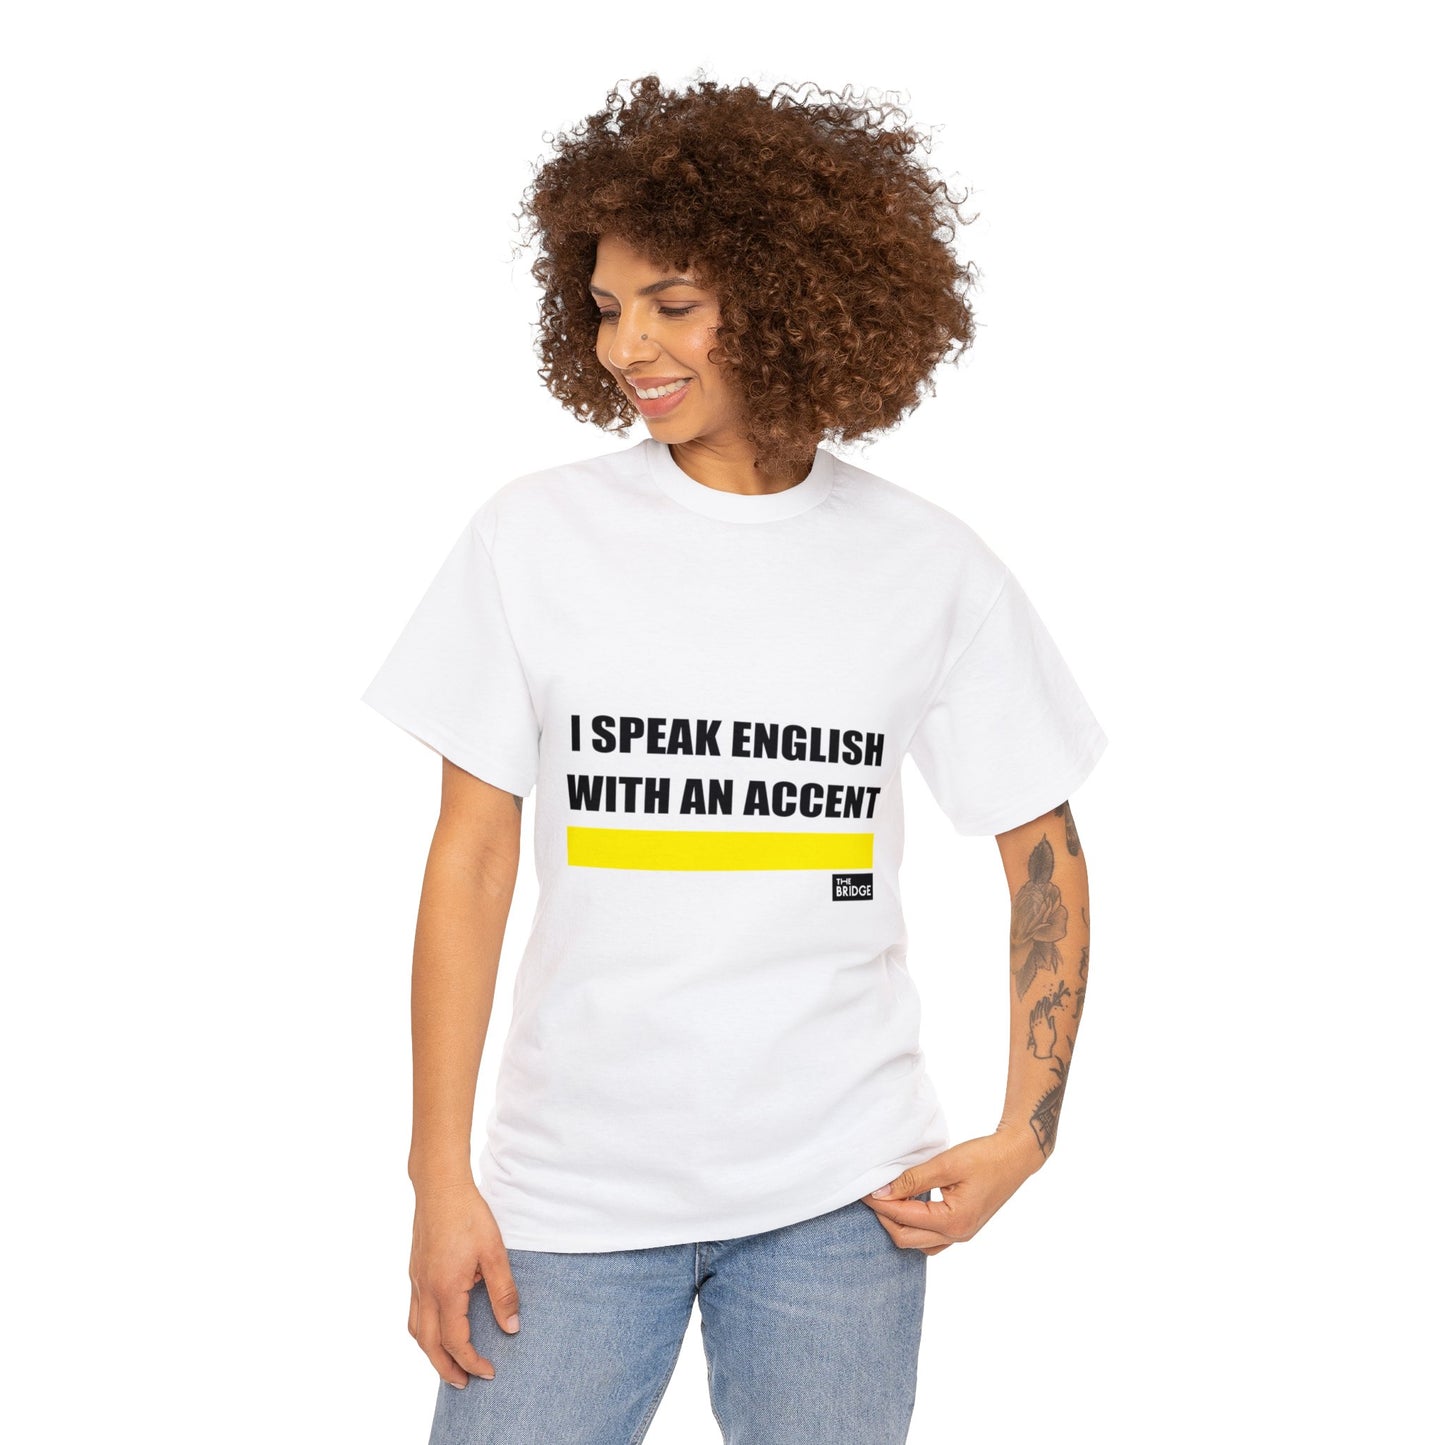 I SPEAK ENGLISH WITH AN ACCENT - WHITE T-SHIRT